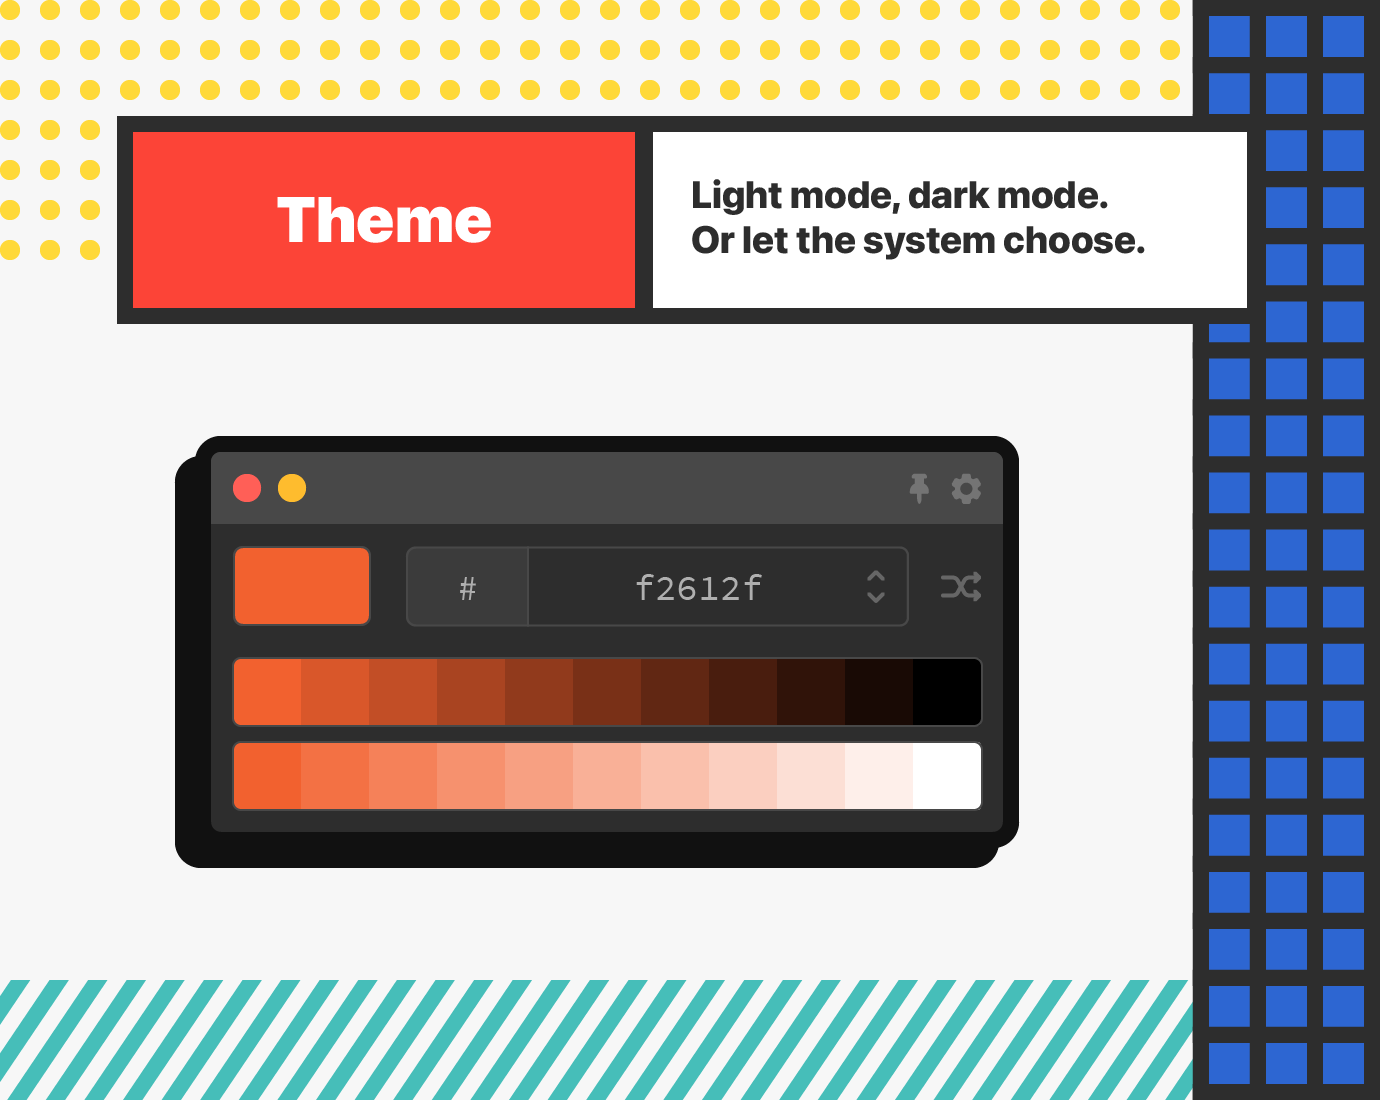 Feature 5 - Theme: Light mode, dark mode. Or let the system choose.